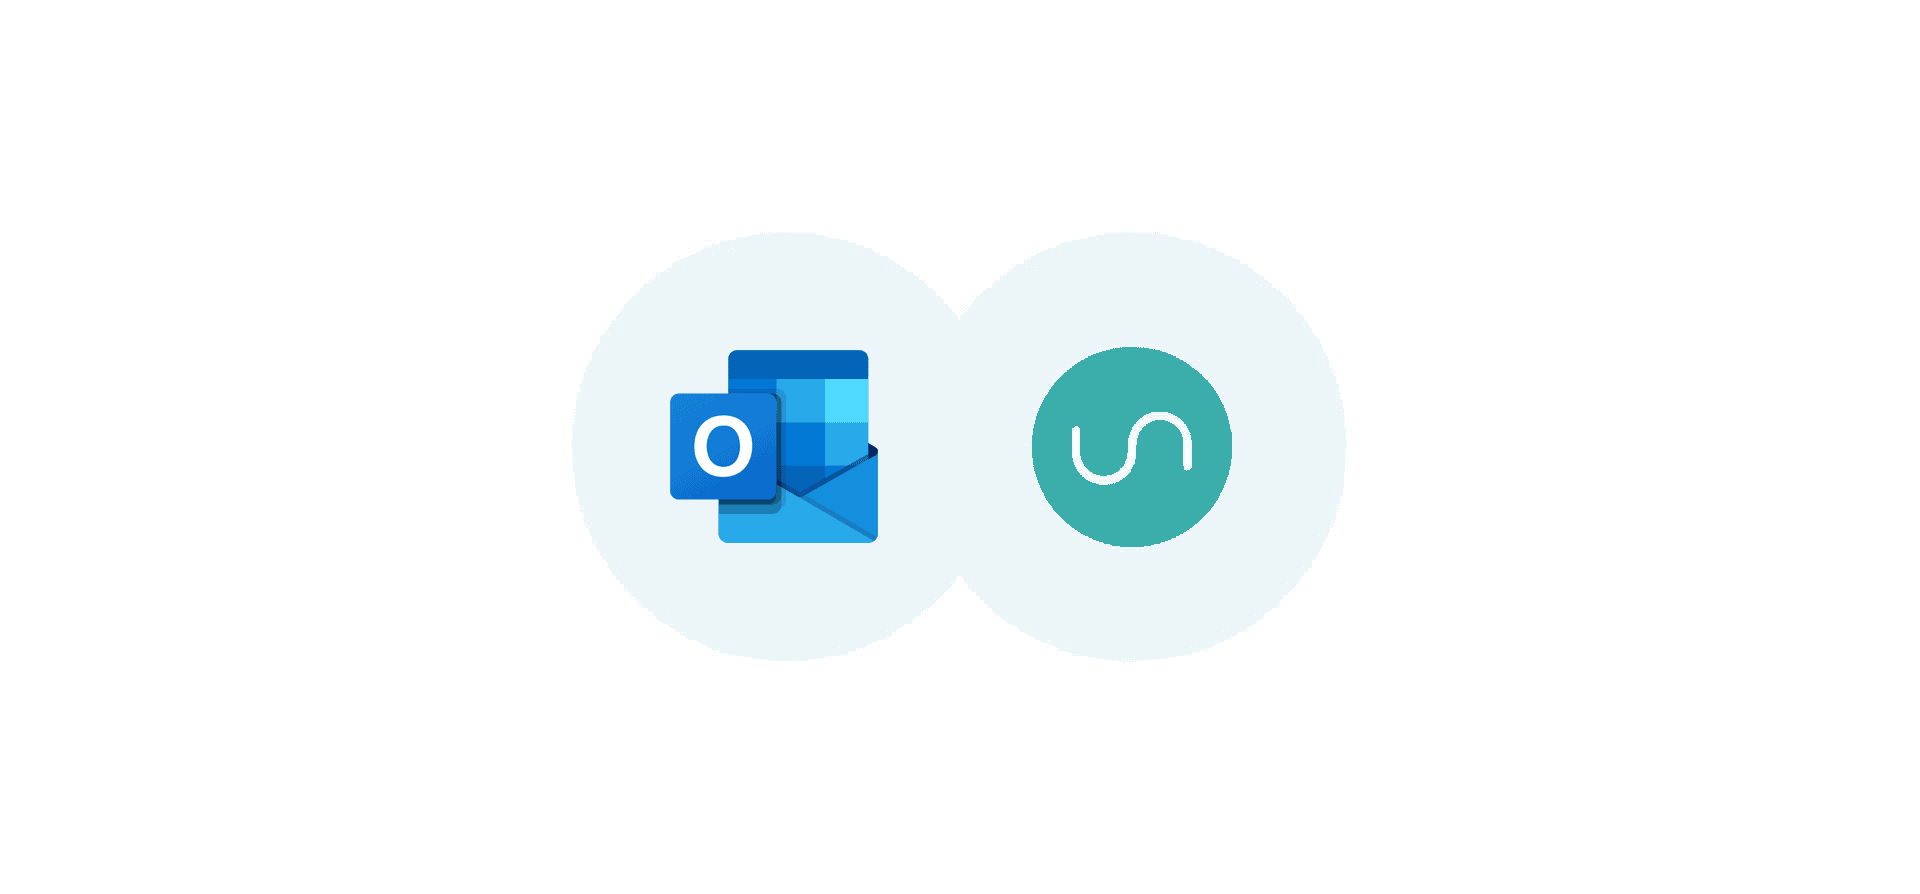 Logos for Outlook and Unito, representing the new Outlook integration.